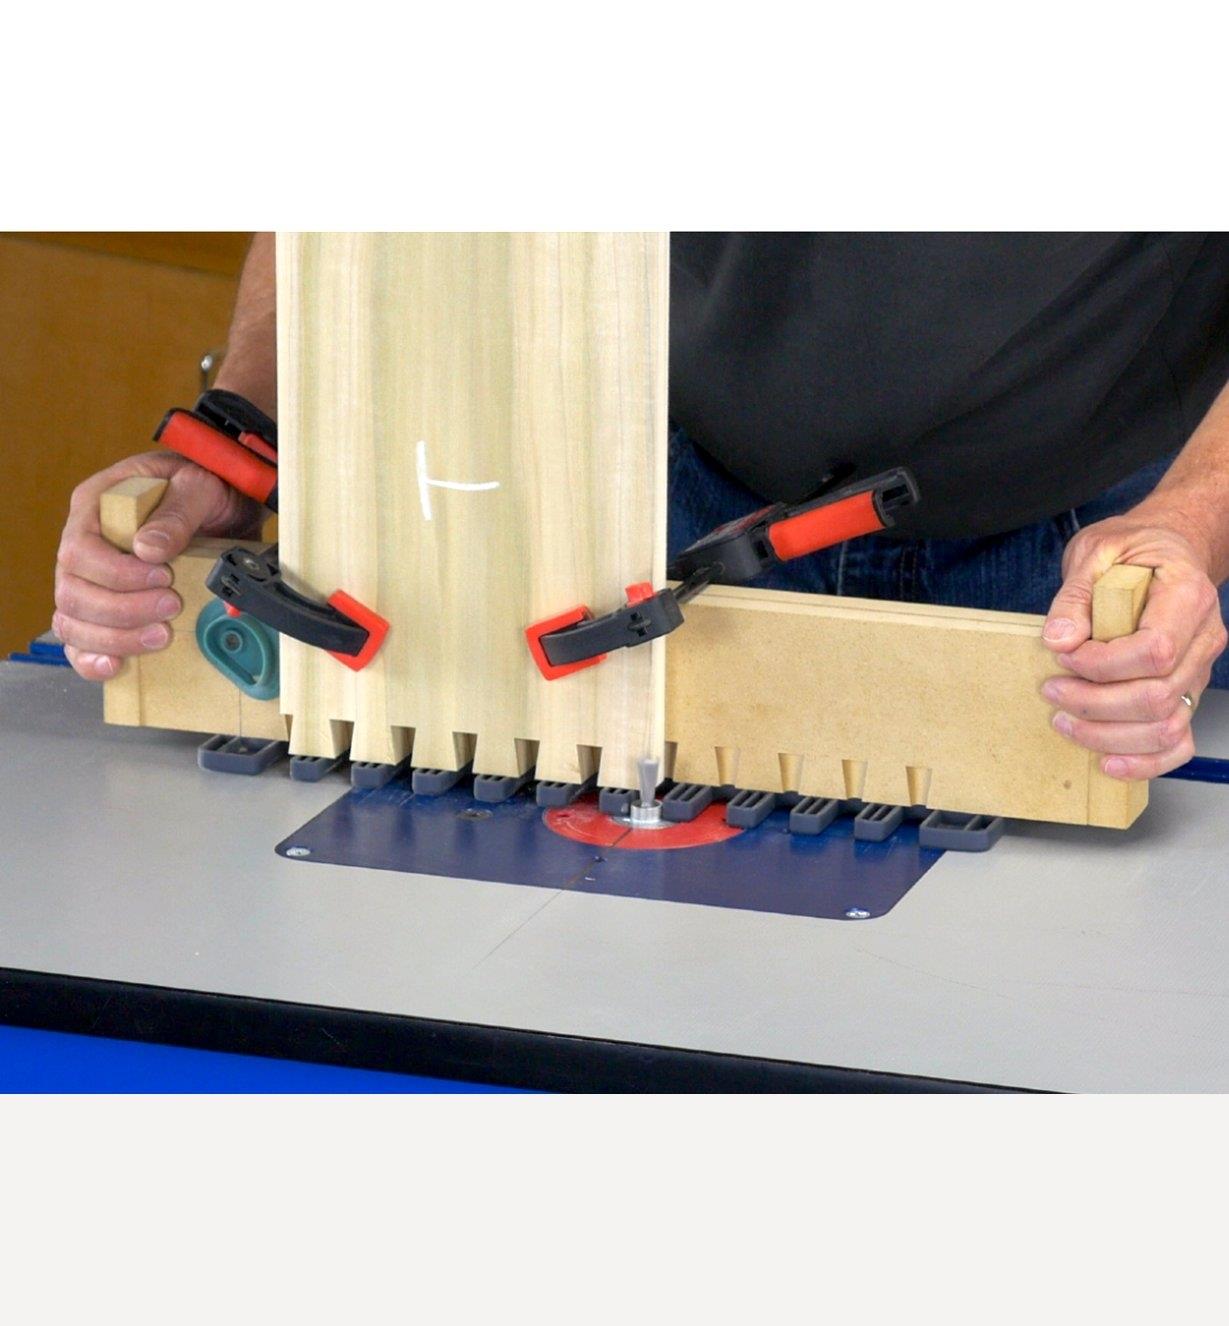 A man using the Leigh Through Dovetail Jig on a router table to cut dovetails